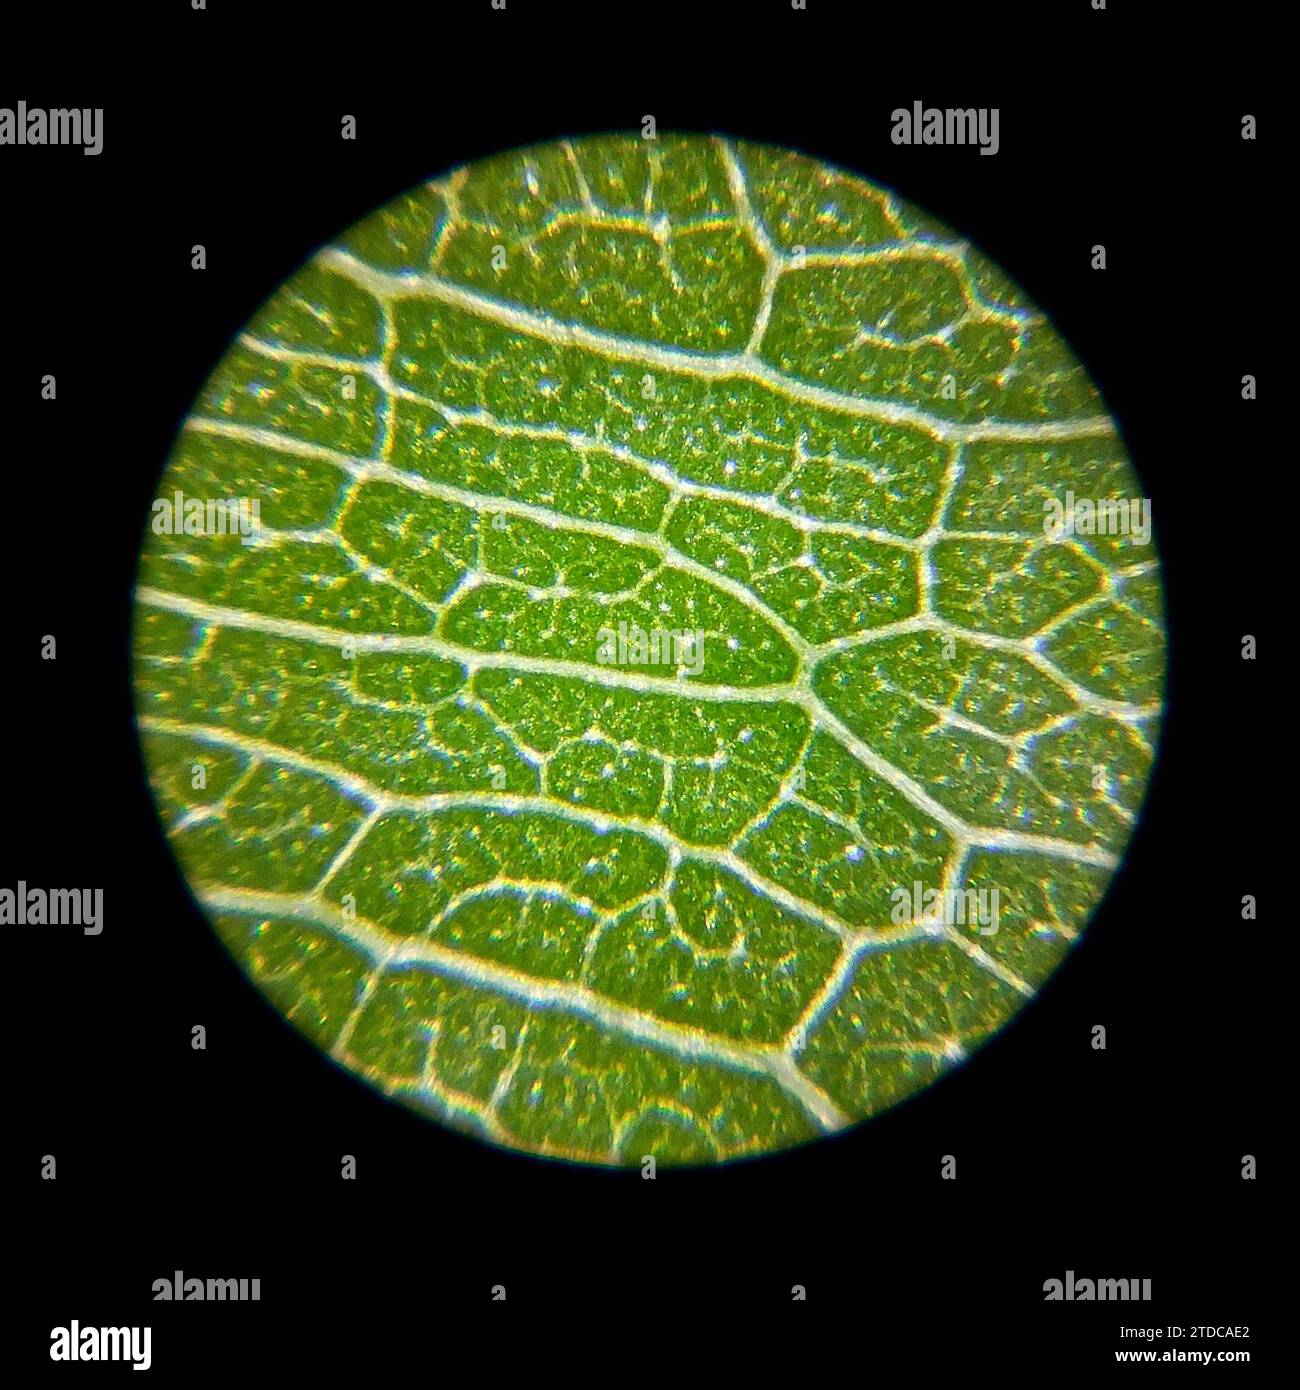 Green plant leaf surface viewed under a microscope Stock Photo